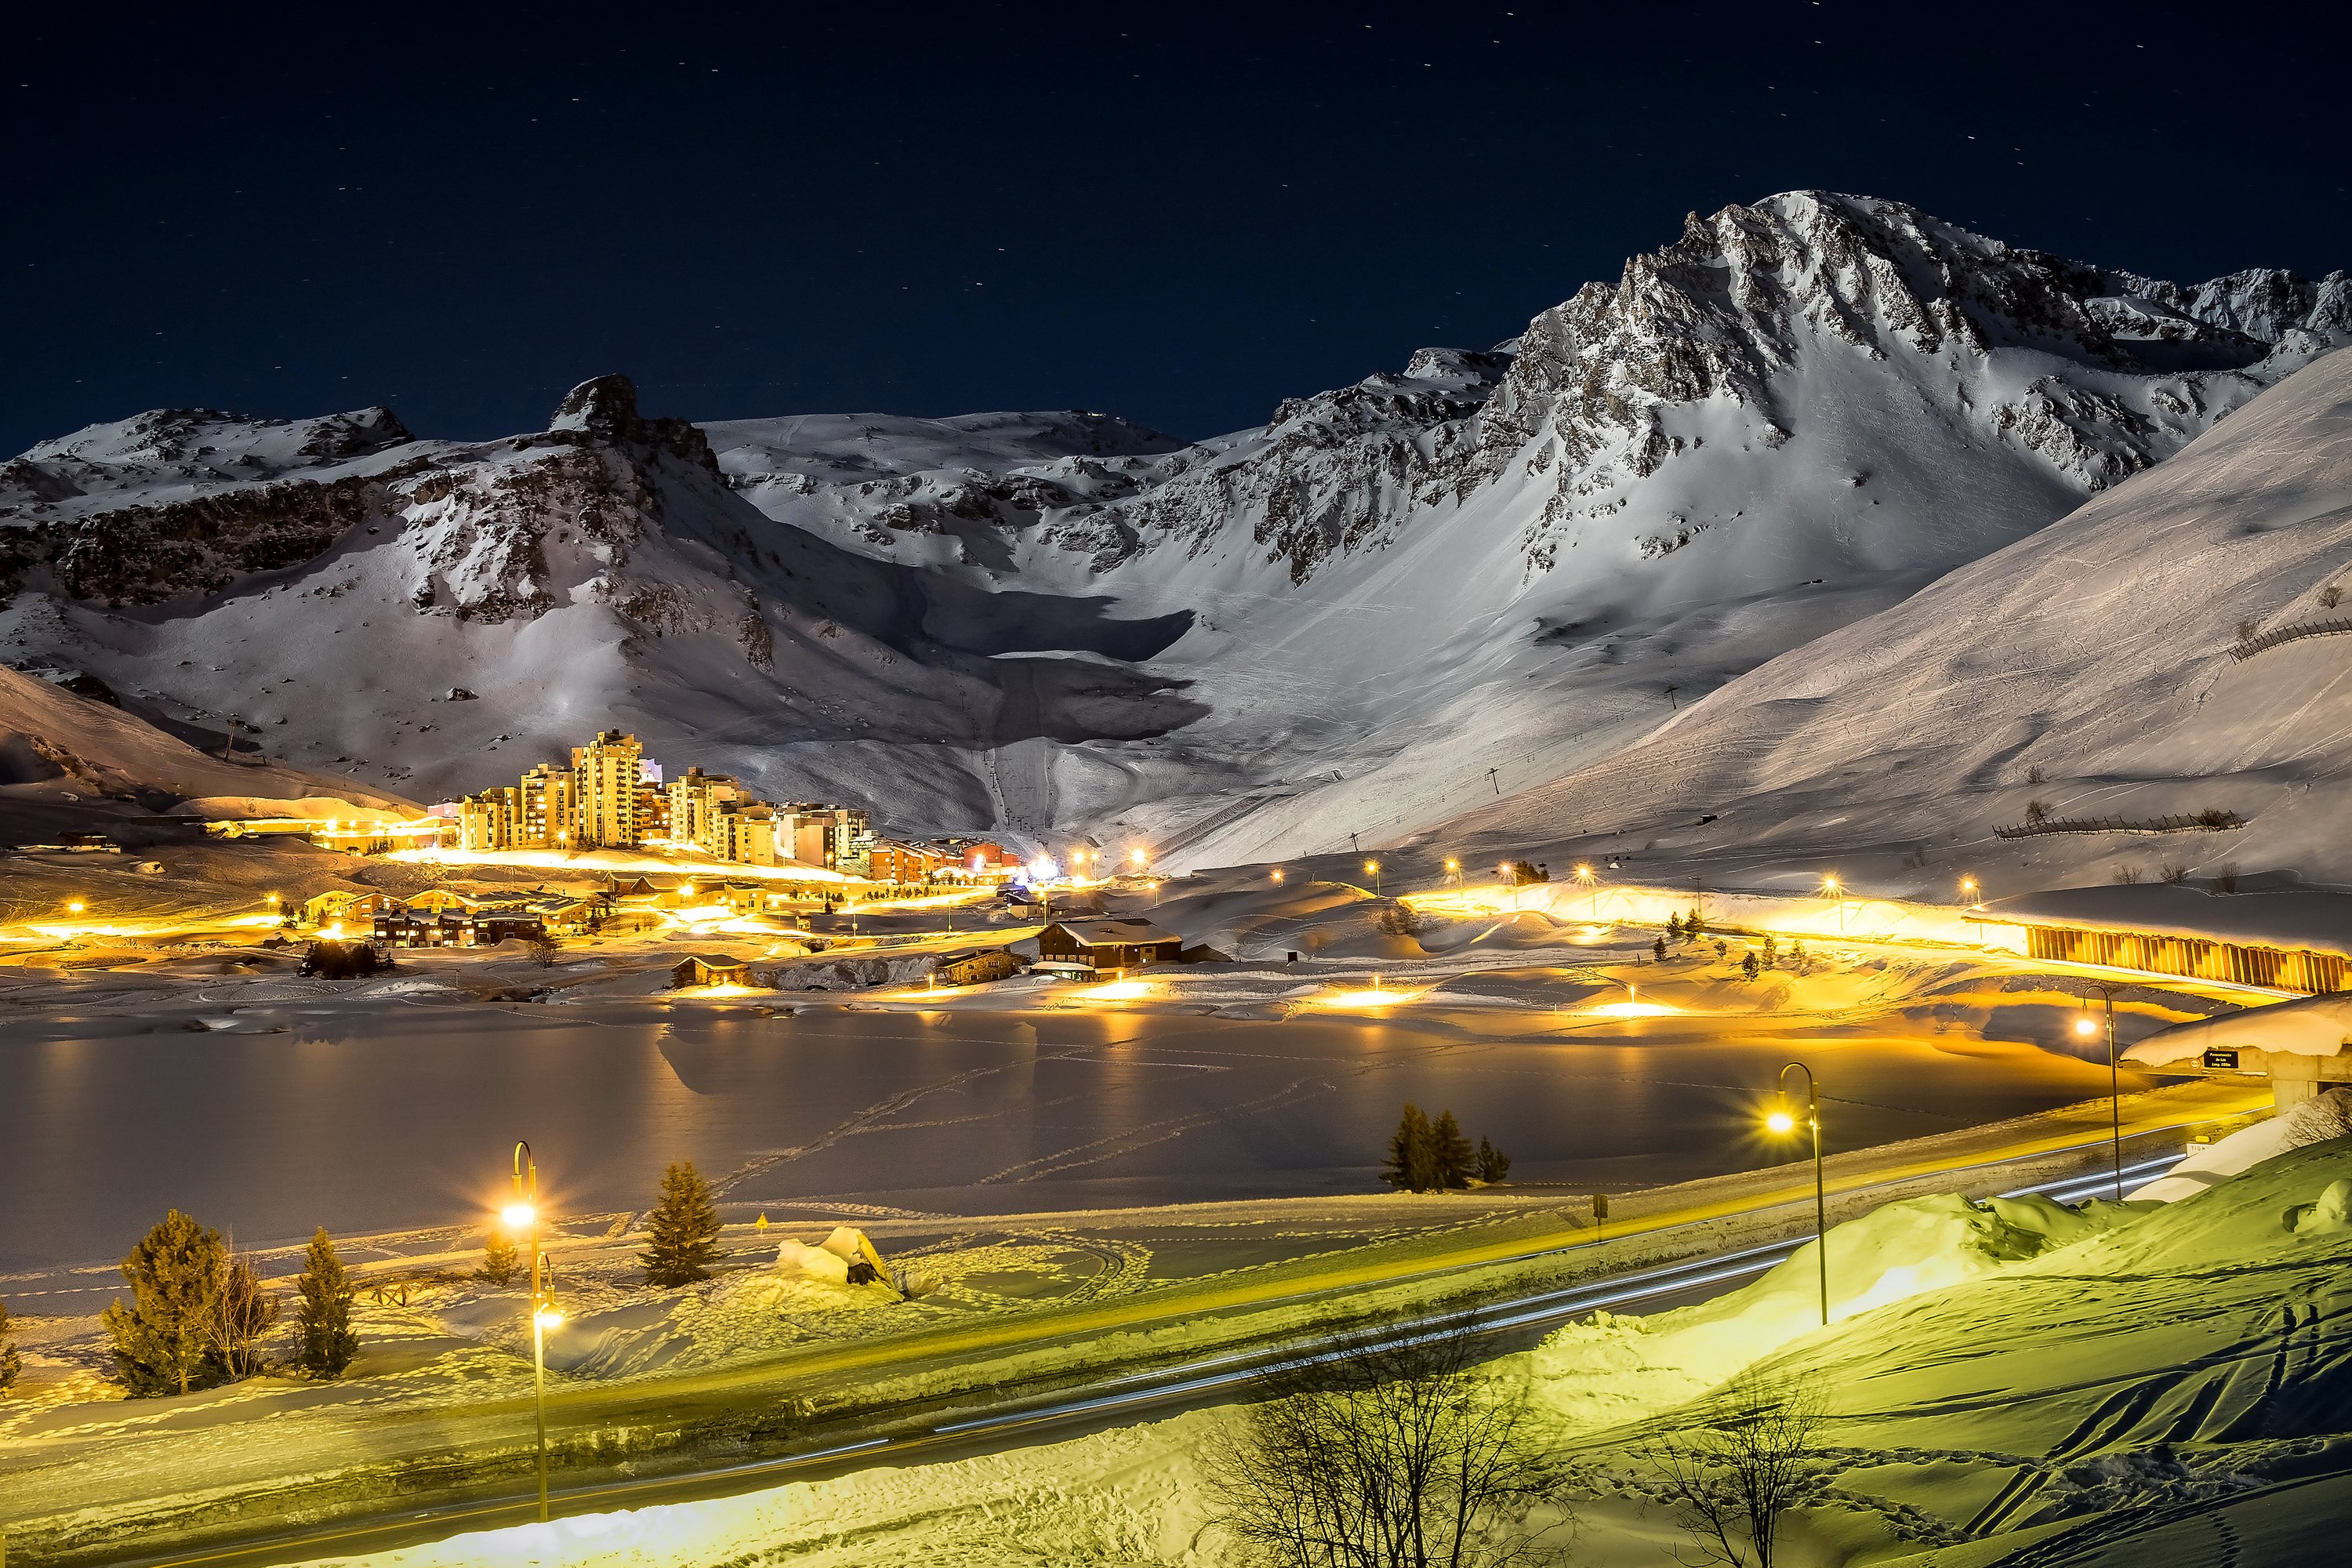 france, Winter, Mountains, Roads, Houses, Snow, Night, Street, Lights, Tignes, Nature Wallpaper